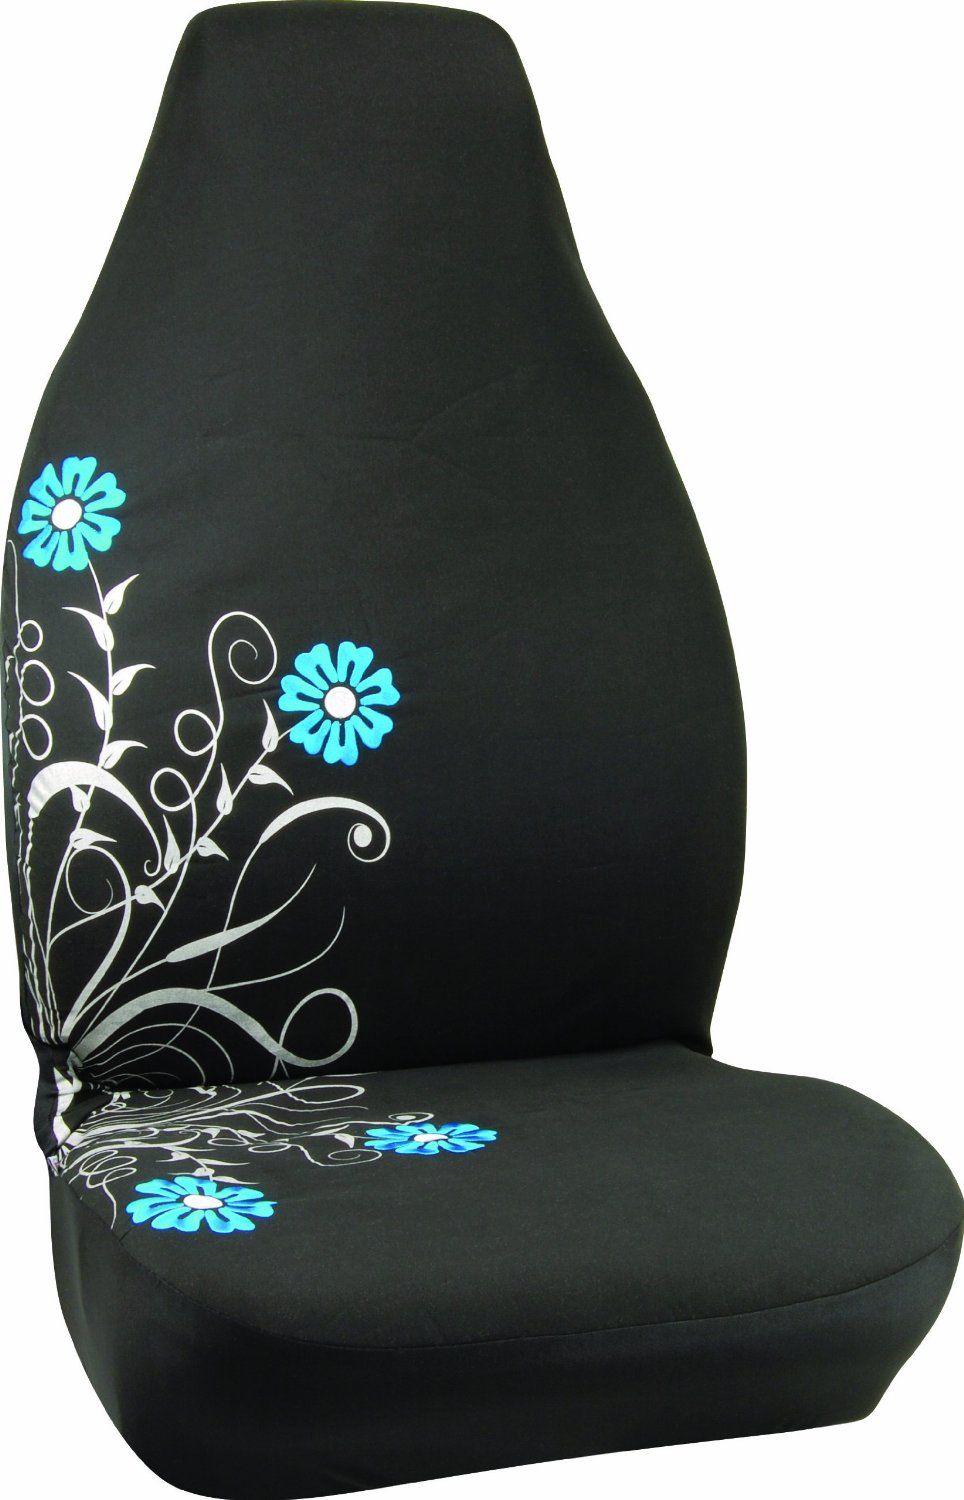 Girly Car Seat Covers and Mats for Women | Girly car, Girly car seat